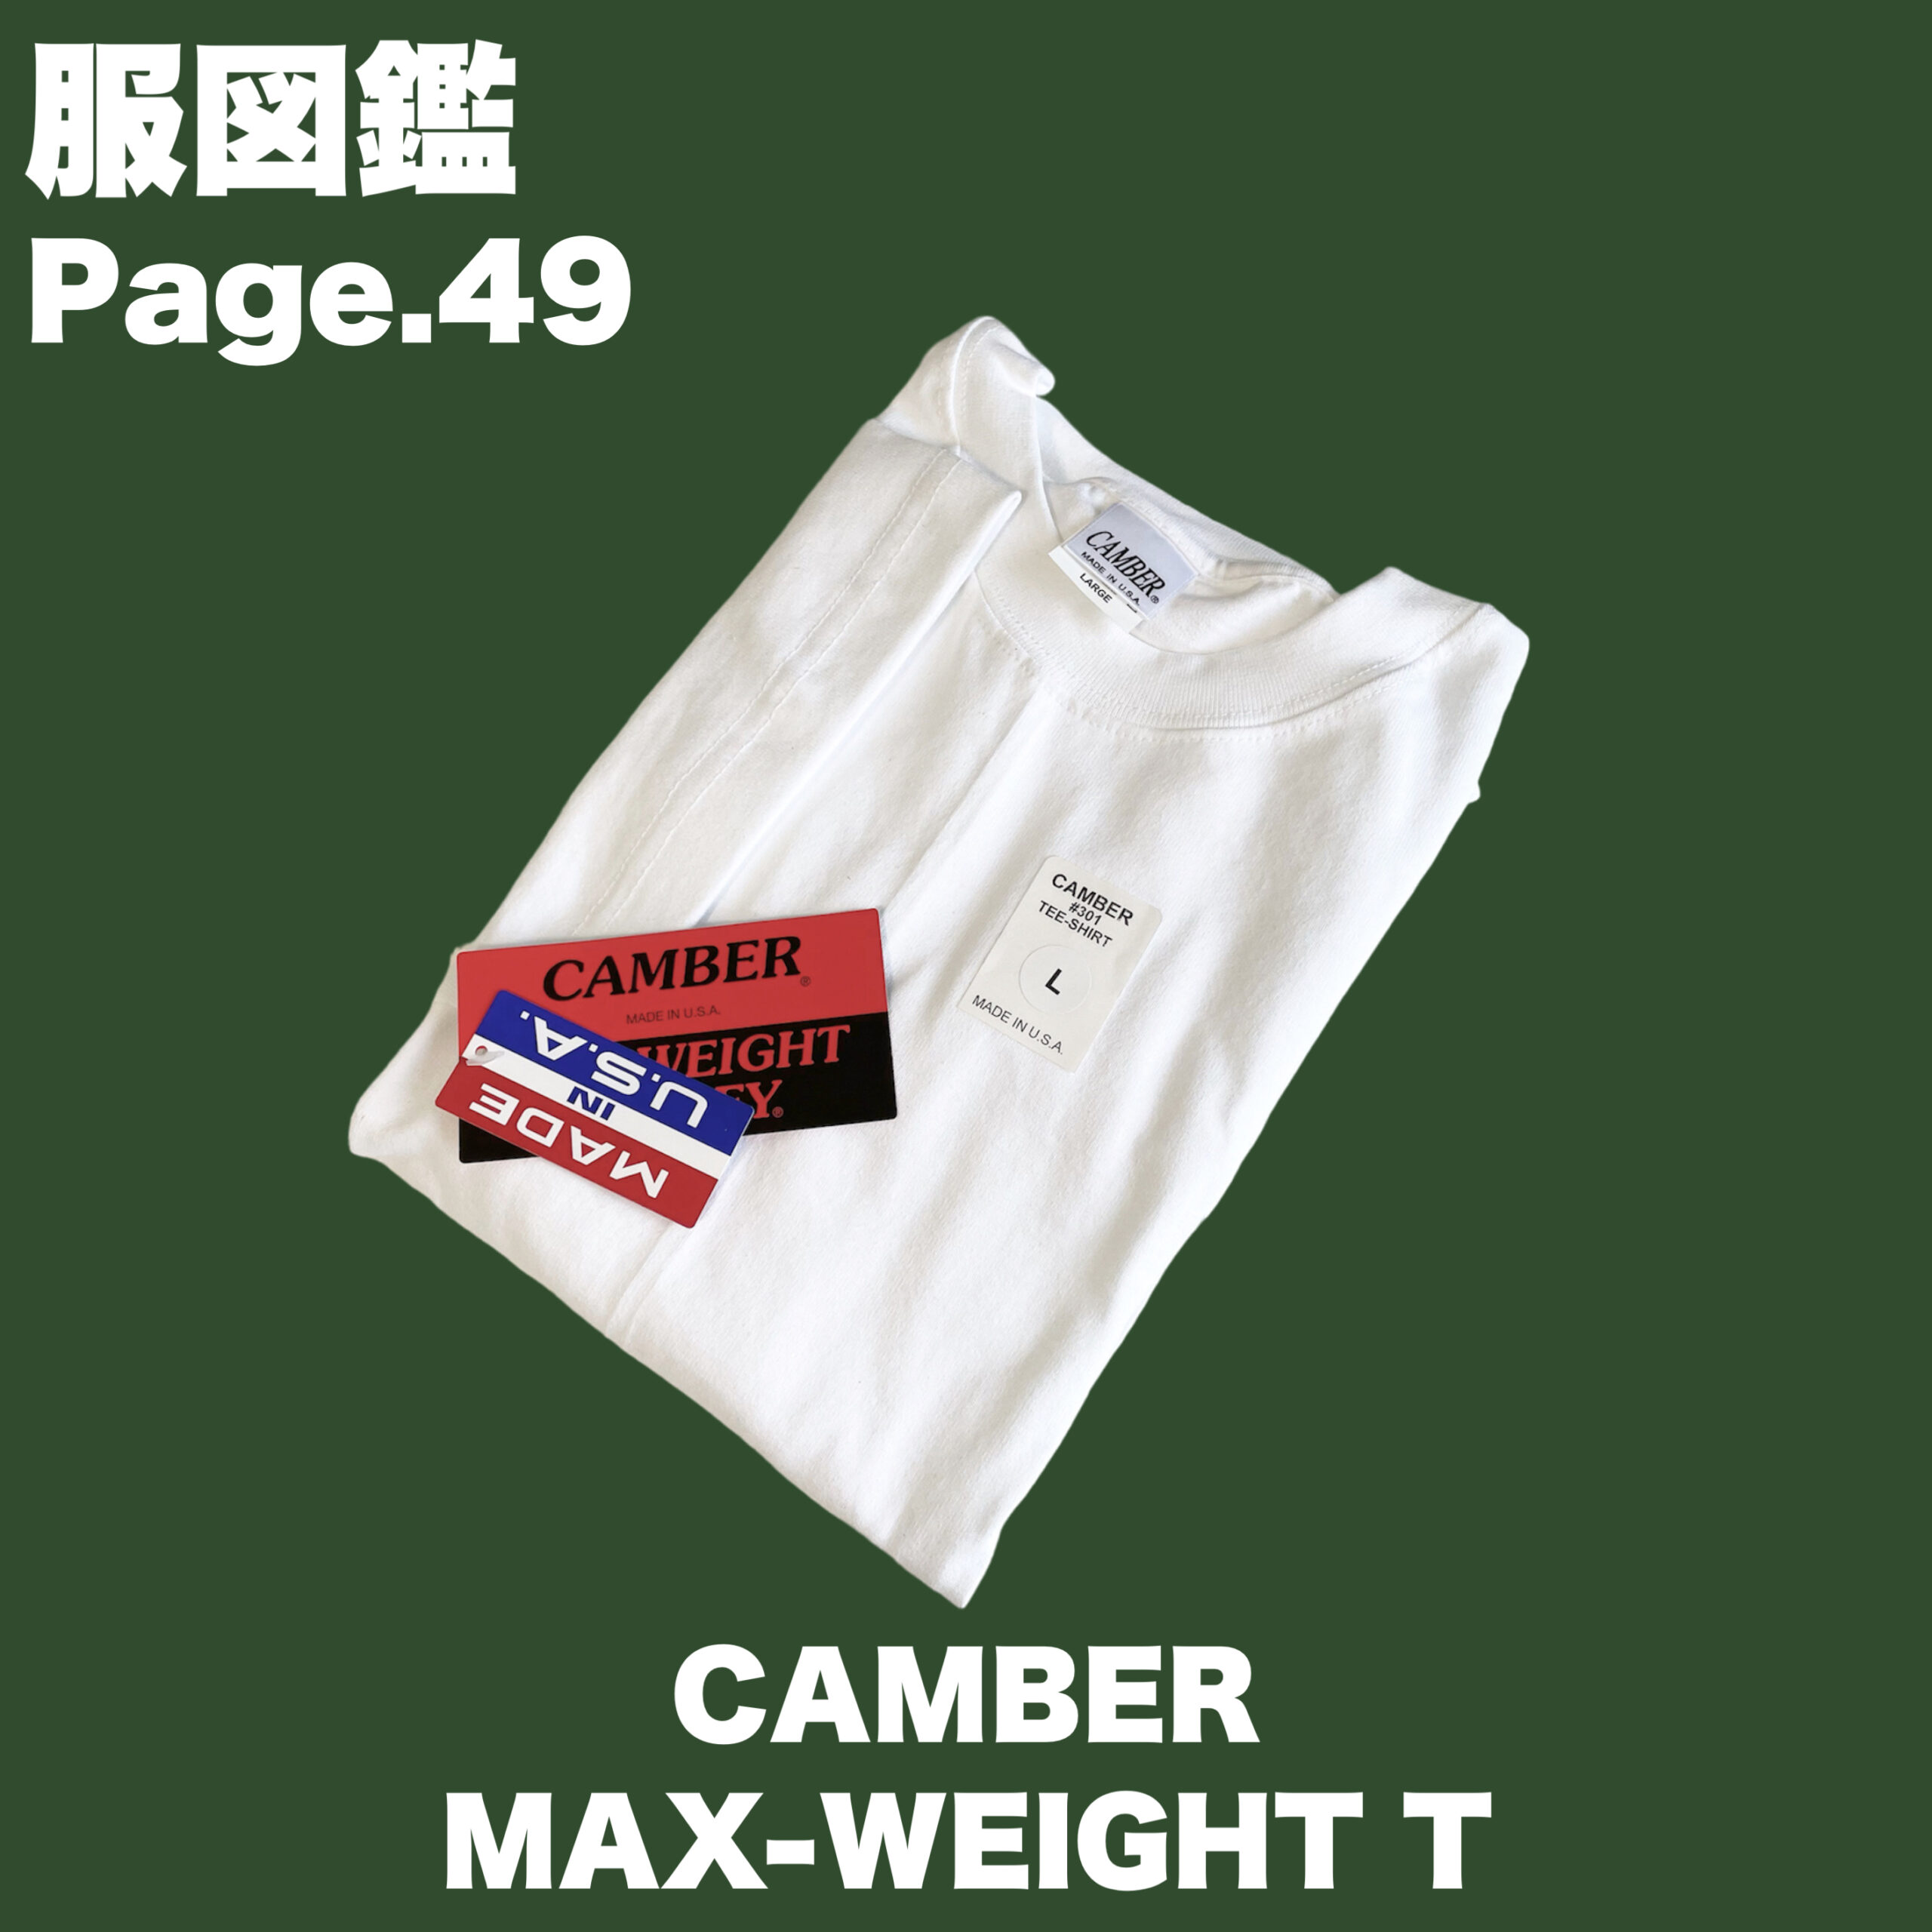 CAMBER Made in USA Ⓜ︎サイズ